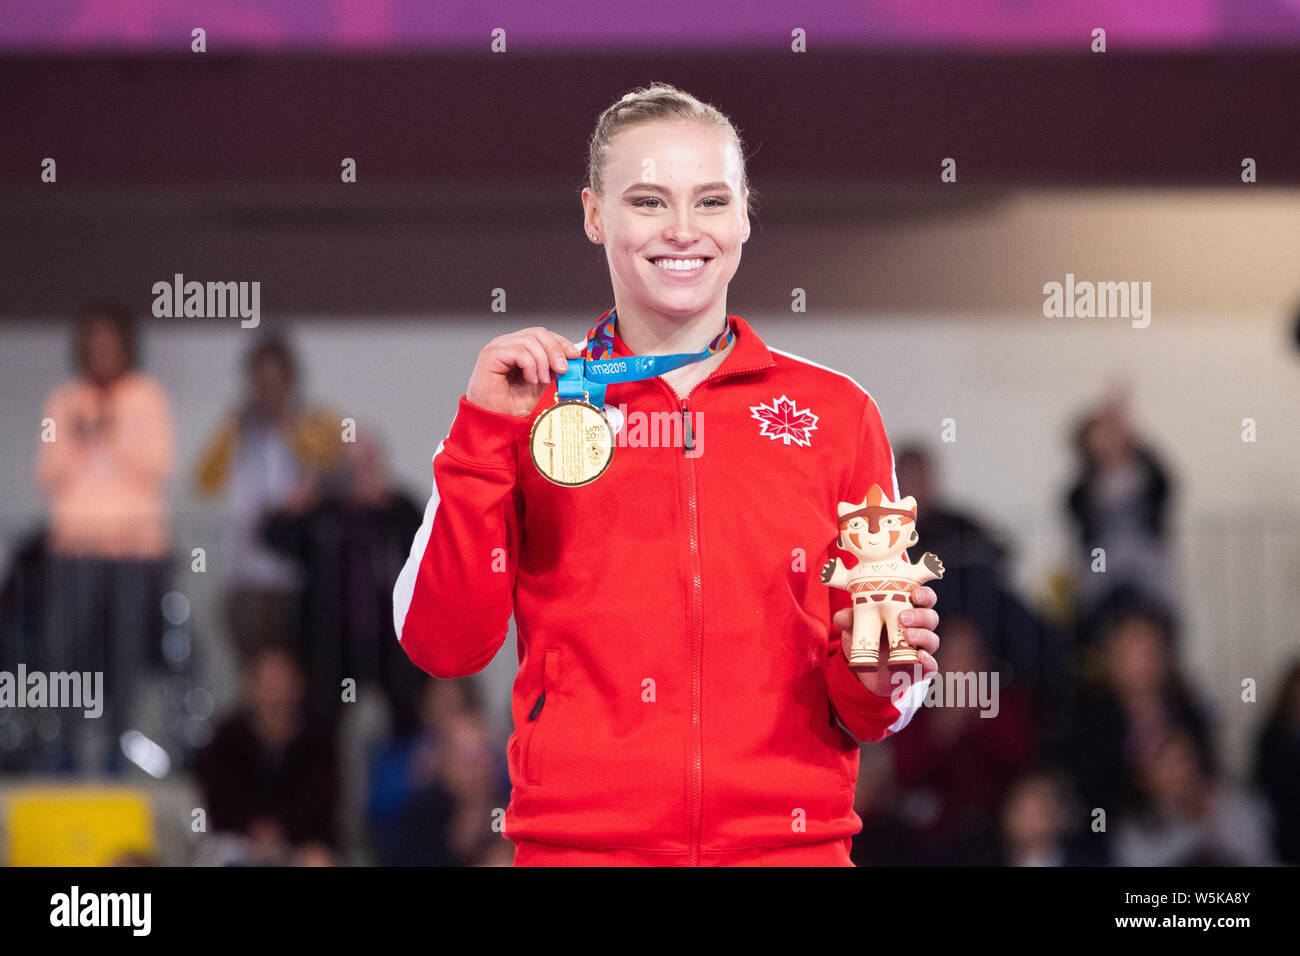 Lima, Peru. 29th July, 2019. Ellie Black of Canada on the podium after winning the gold medal at the Pan American Games Artistic Gymnastics Women's All Around final at Polideportivo Villa el Salvador in Lima, Peru. Daniel Lea/CSM/Alamy Live News Stock Photo